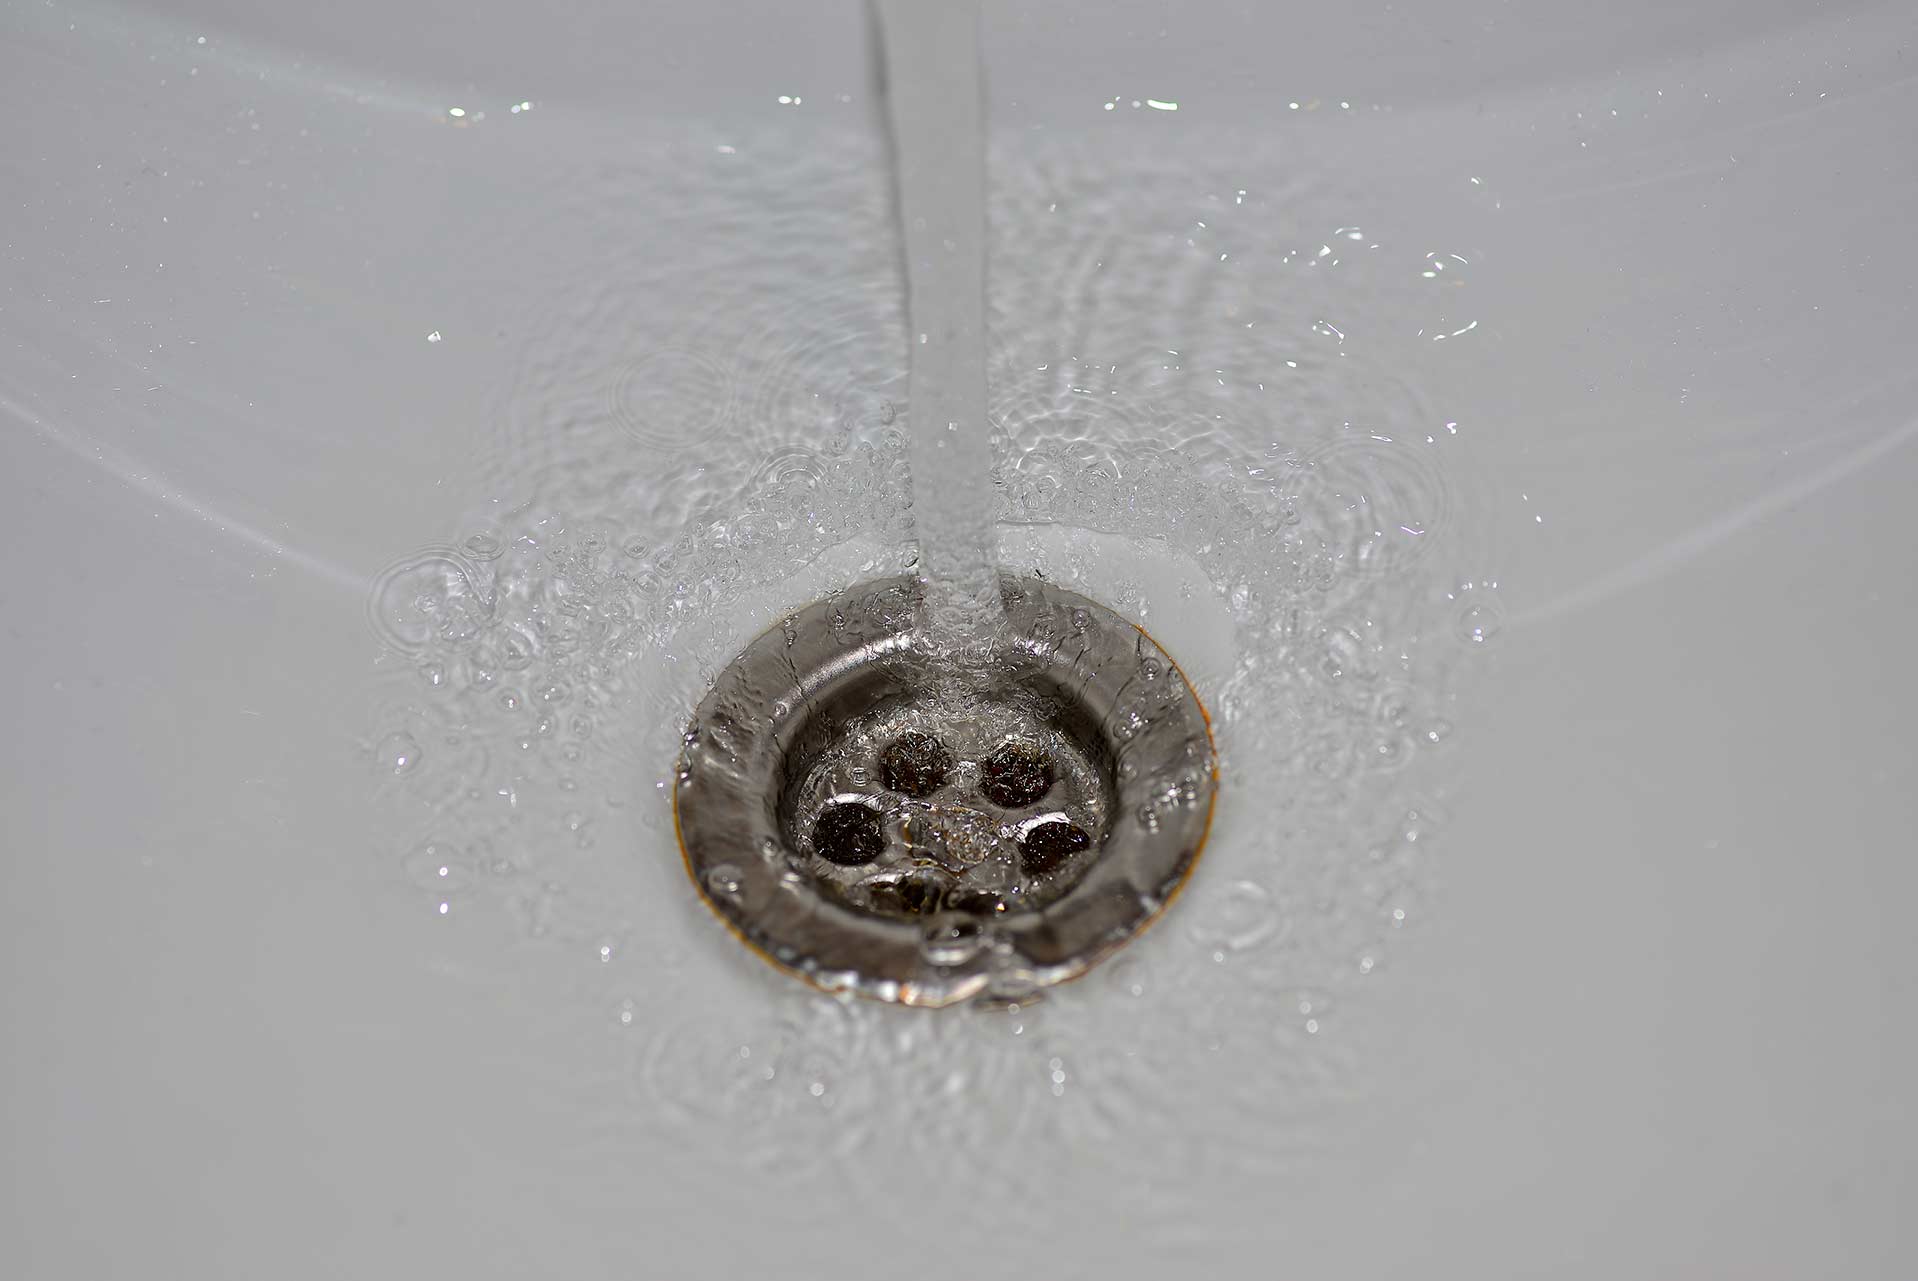 A2B Drains provides services to unblock blocked sinks and drains for properties in Droitwich.